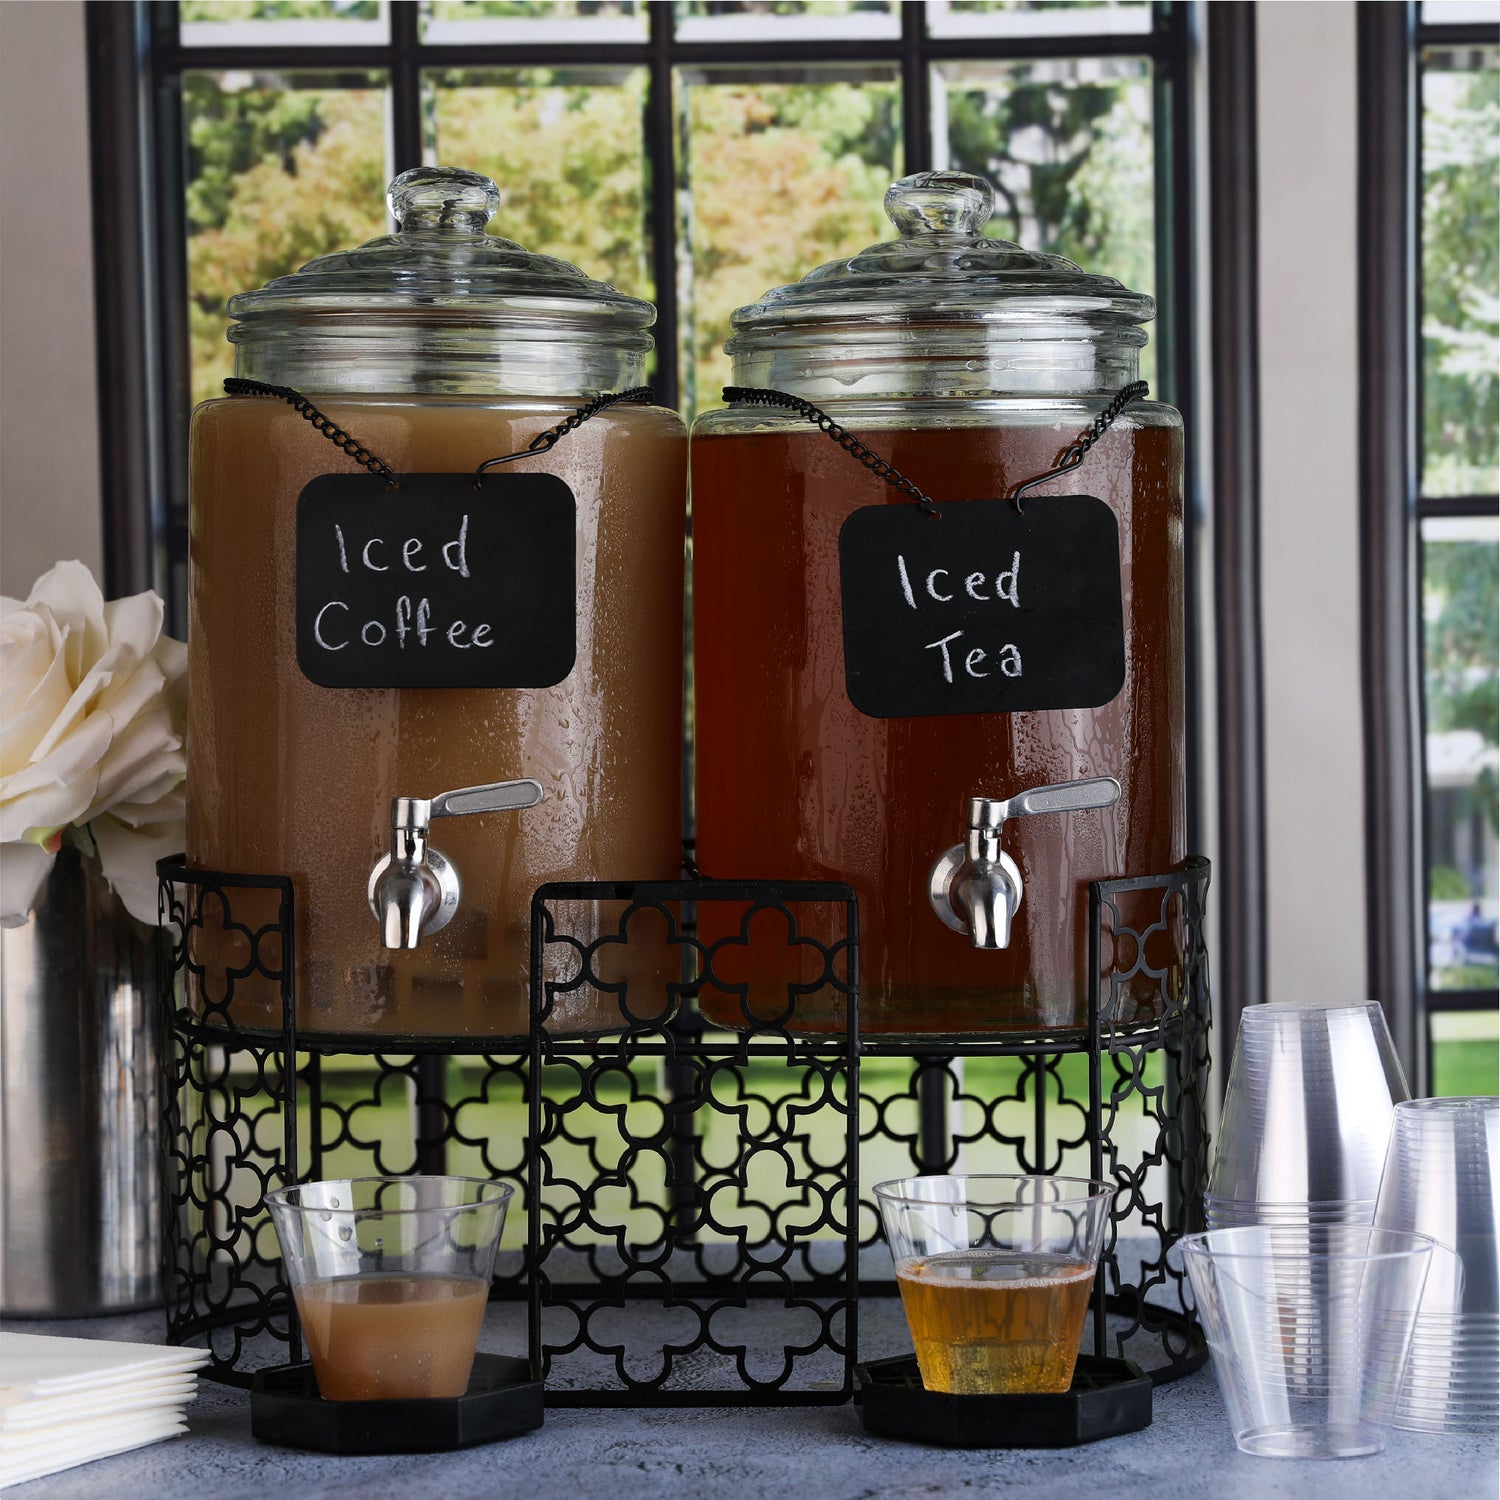 Ideas on How to Use Your Drink Dispenser for your Next Party – Kitchentoolz